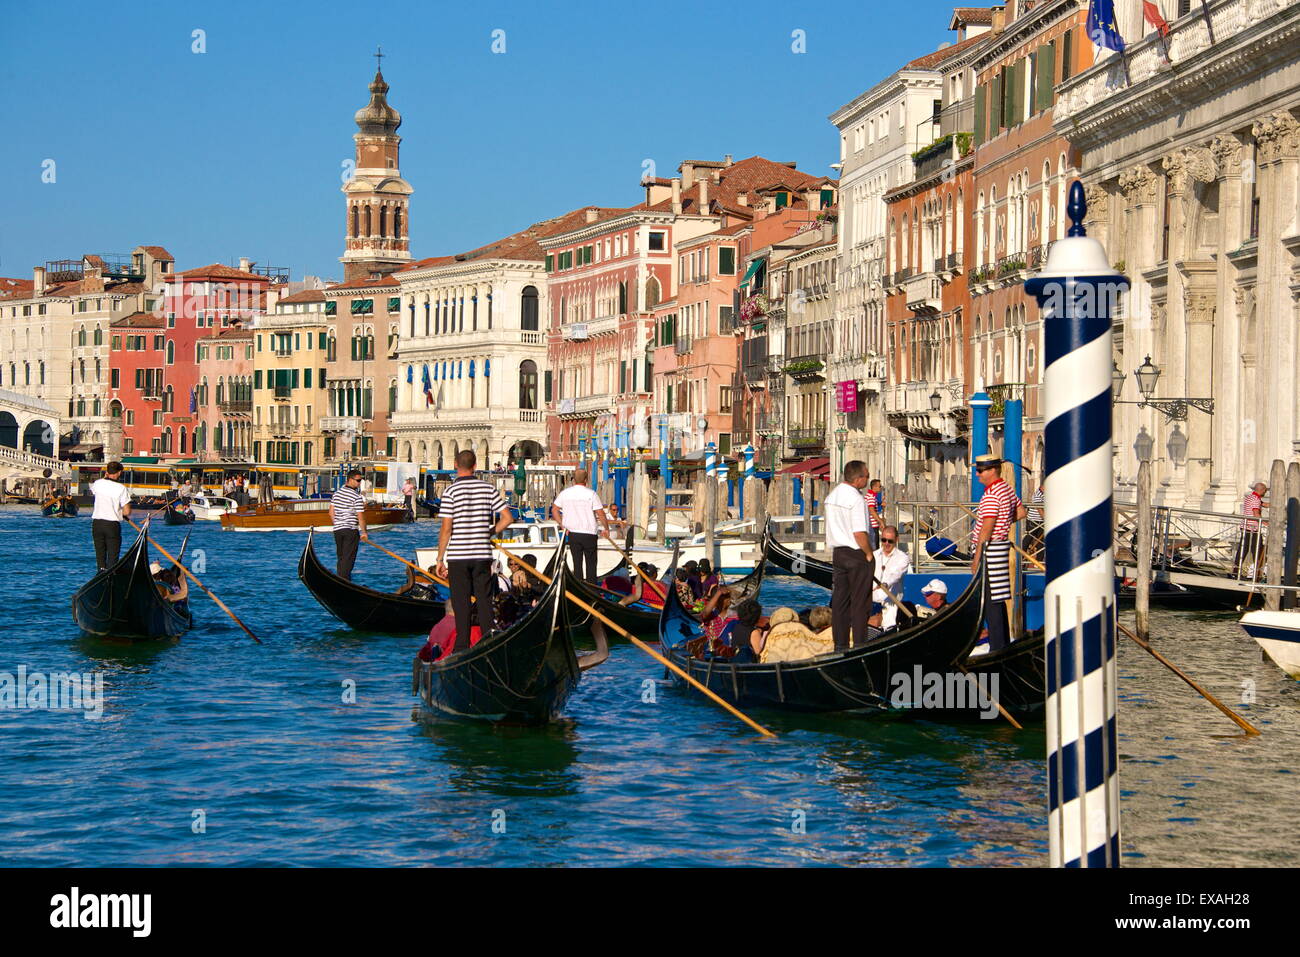 Gondolas and gondoliers, palaces facades and church steeple, Grand Canal, Venice, UNESCO World Heritage Site, Veneto, Italy Stock Photo